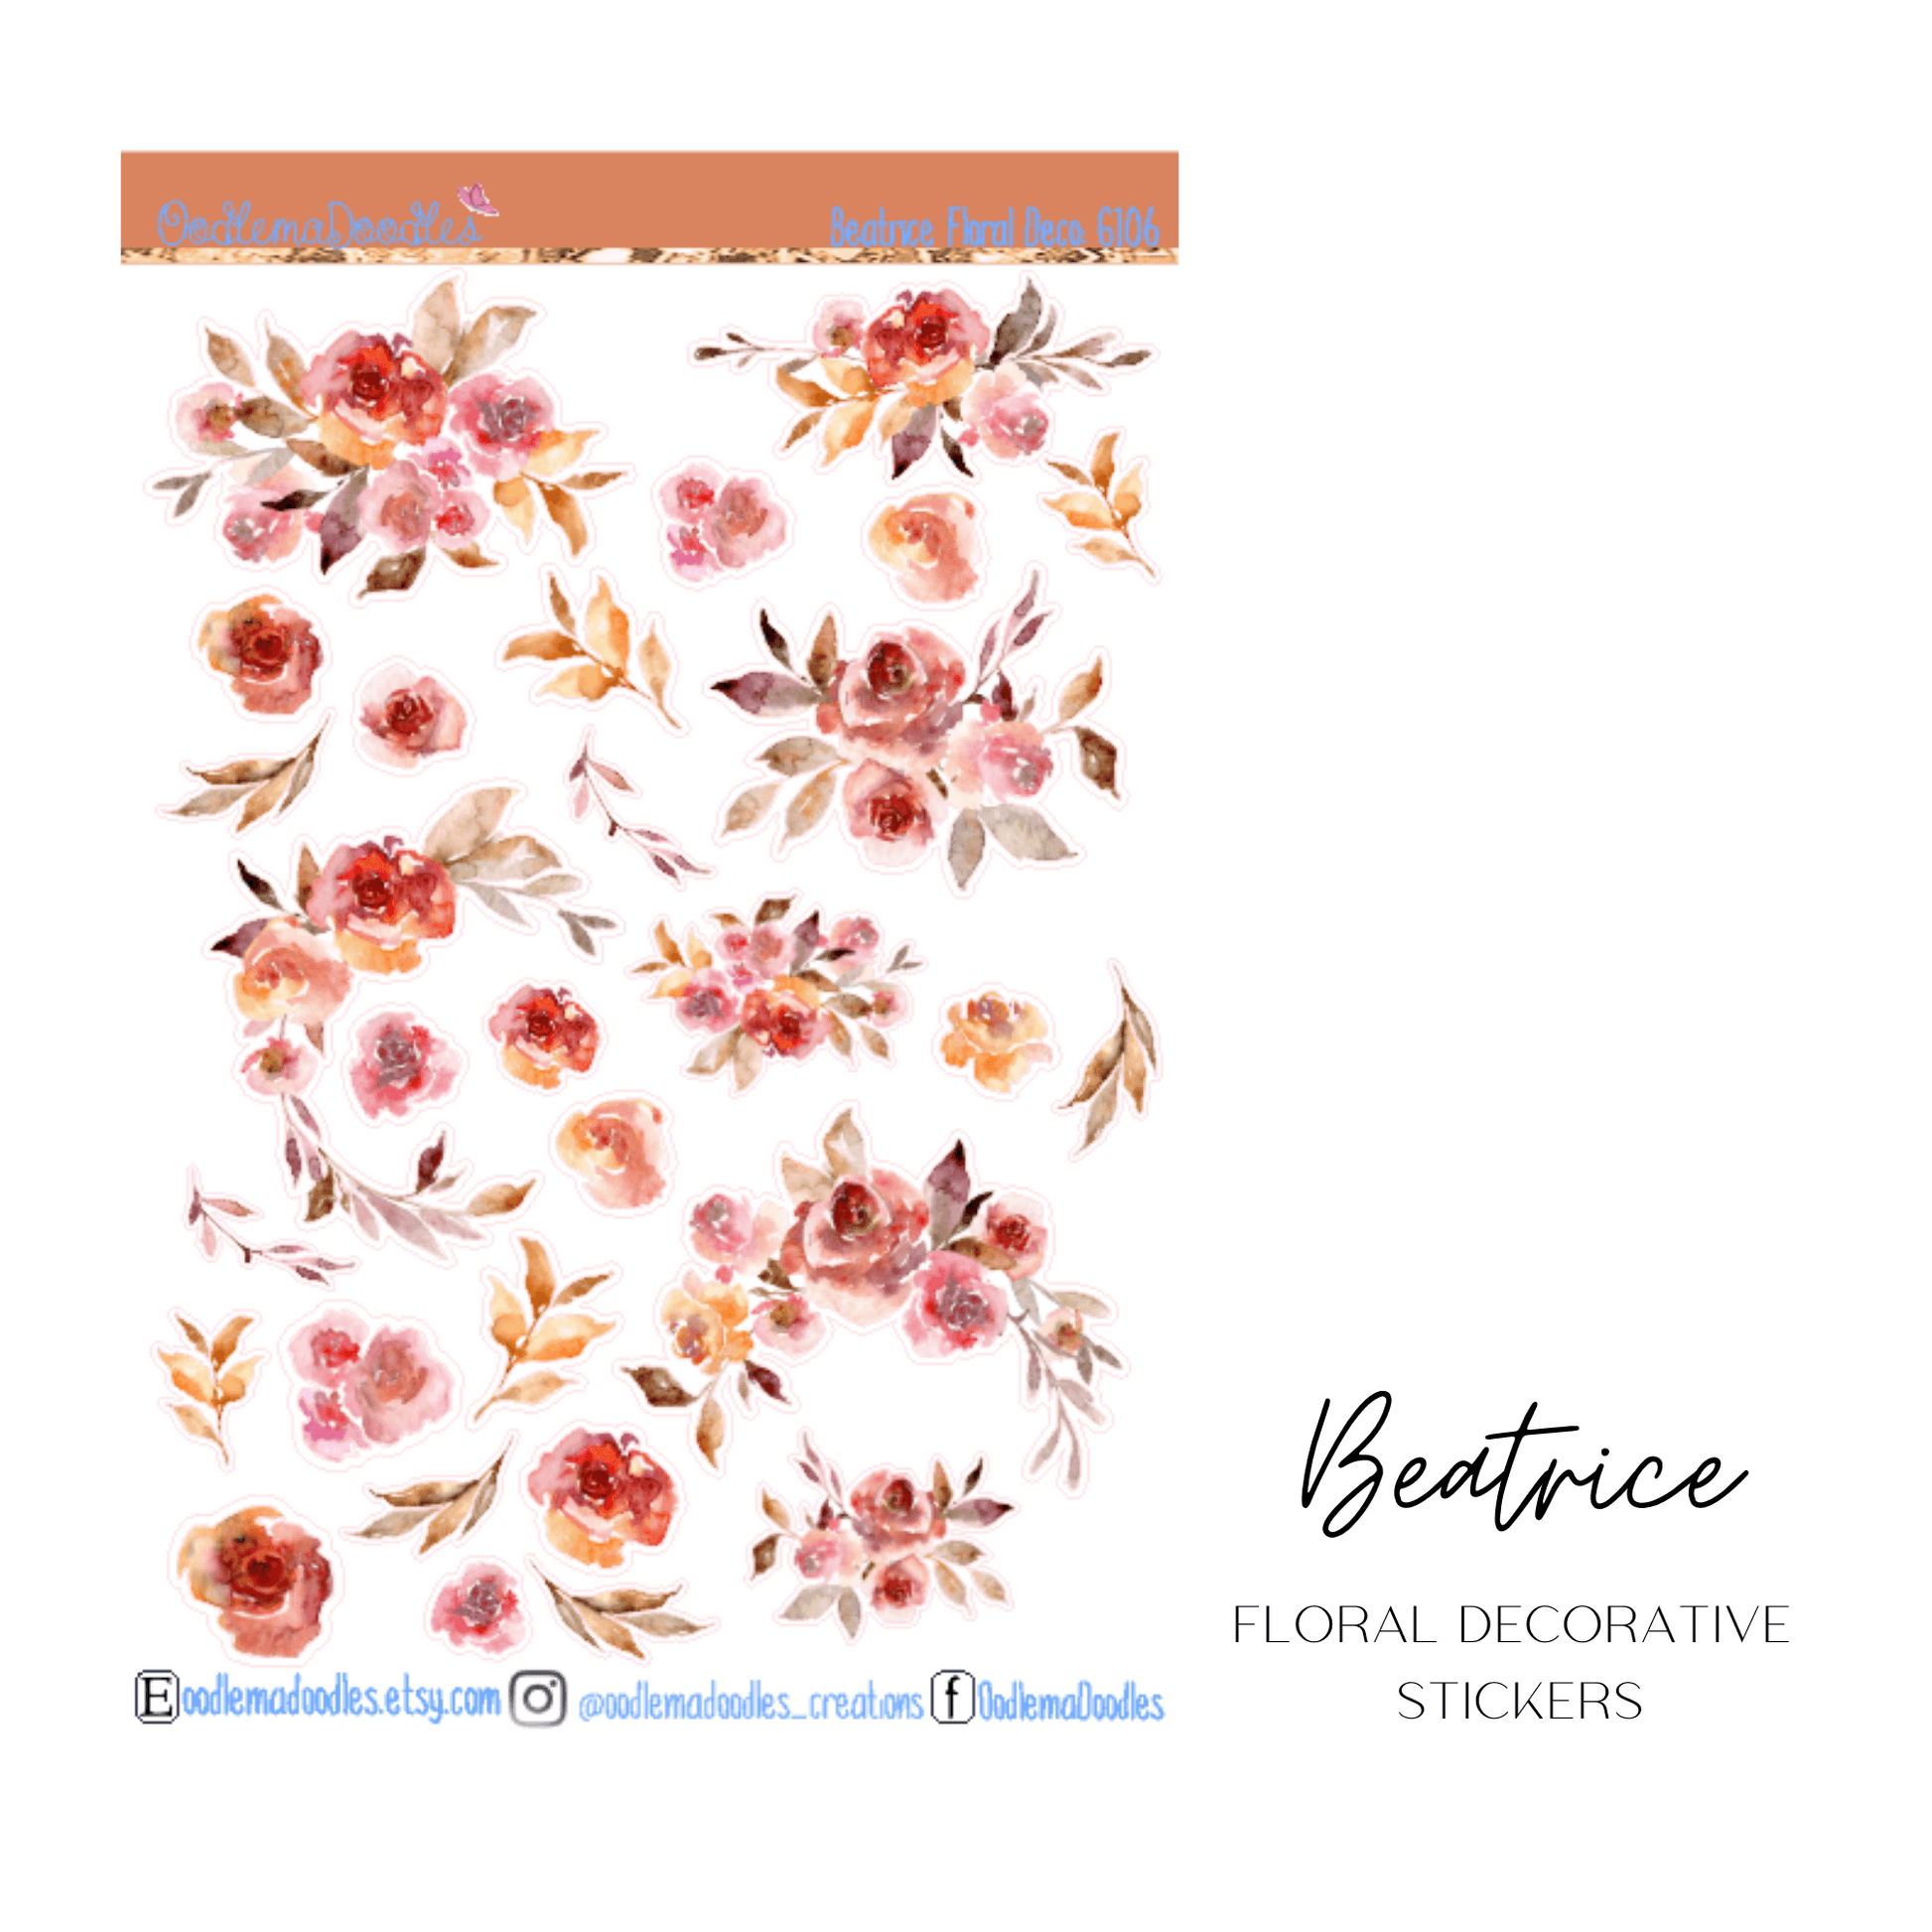 Beatrice Floral Decorative Stickers - oodlemadoodles